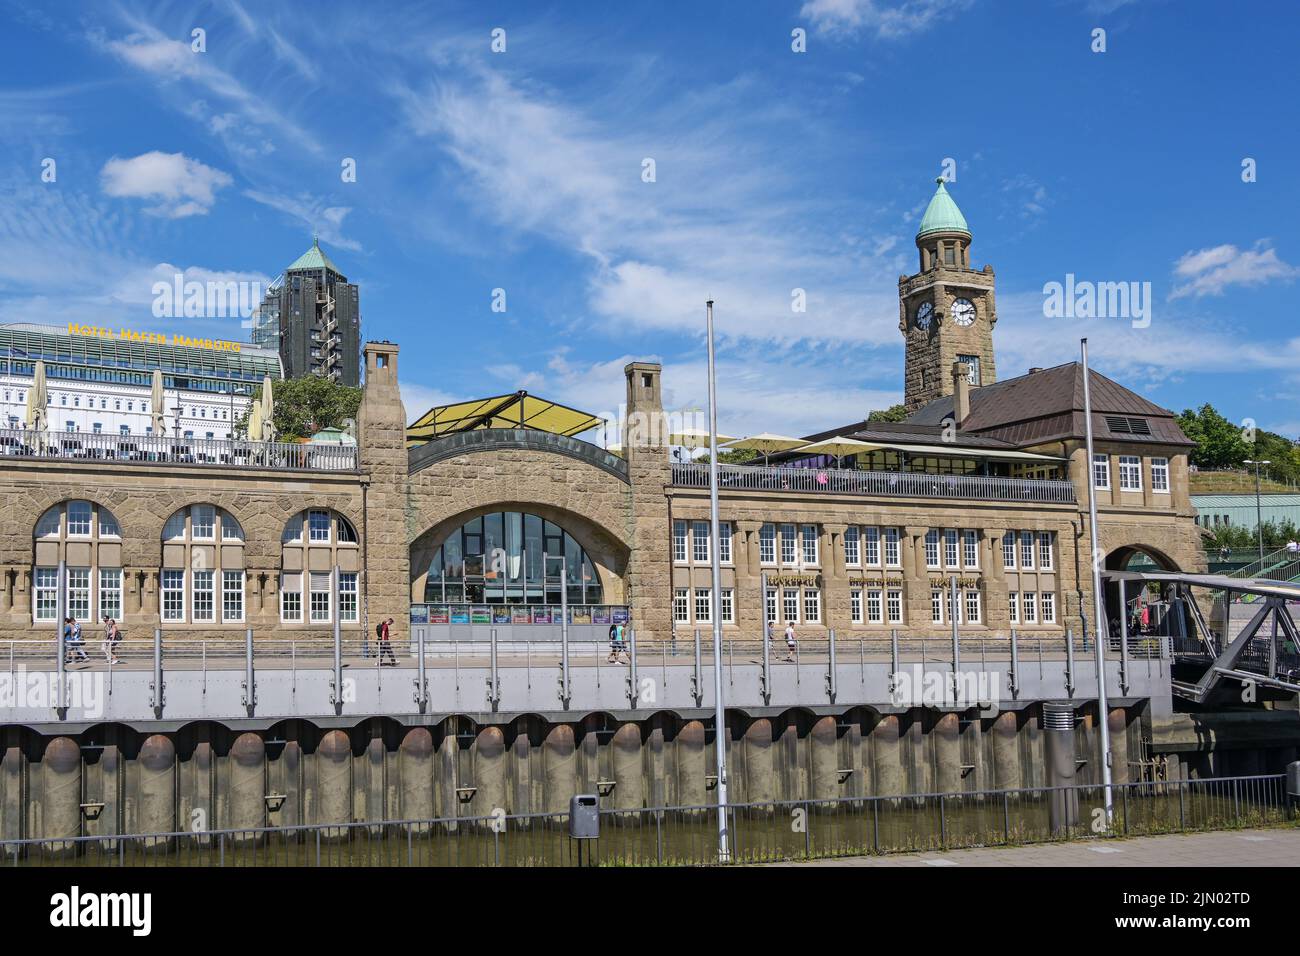 Hamburg, Germany, August 4, 2022: Landungsbruecken St. Pauli piers, terminal building with clock tower on the river Elbe, famous landmark and travel d Stock Photo